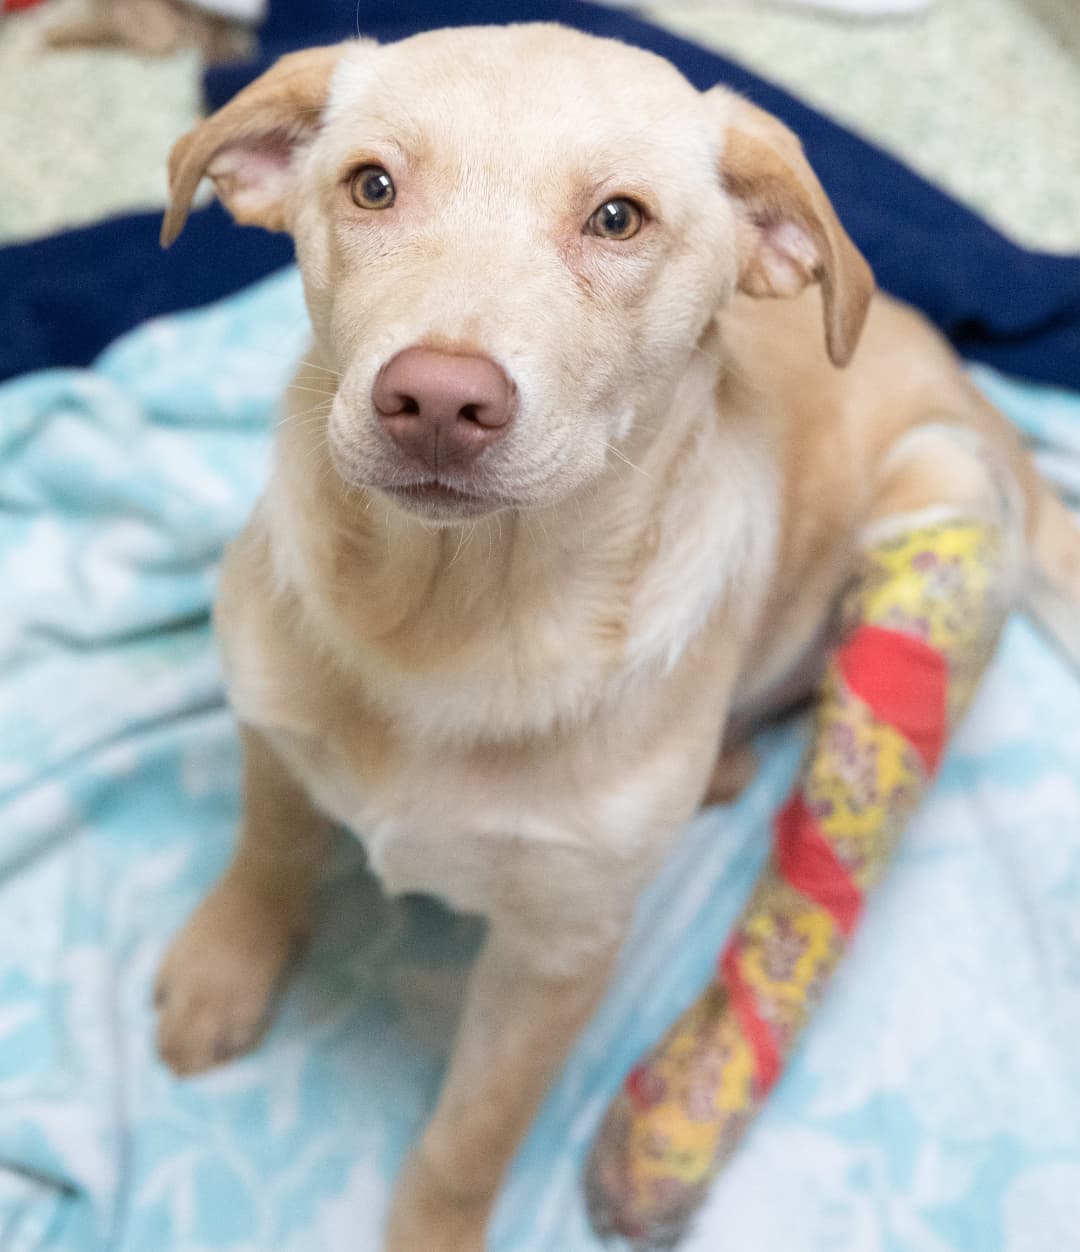 For Giving Tuesday, your gift of any size is MATCHED! We have a goal of $10,000 to help neglected animals like Buffalo Plaid. 

We don’t know if this puppy was abused, attacked, or hit by a car...we just know he came to us with a broken leg and open sores. And he desperately needed help.

Our shelter medical team is working hard to save Buffalo Plaid’s leg. He’s now wearing a splint and getting laser therapy to help heal his wounds. One of our loving foster families is giving this sweet guy plenty of TLC during his recovery. 

We’re giving our all every day for Buffalo Plaid. Can you help us today on Giving Tuesday? Every gift is DOUBLED to care for him and other injured animals in our community!